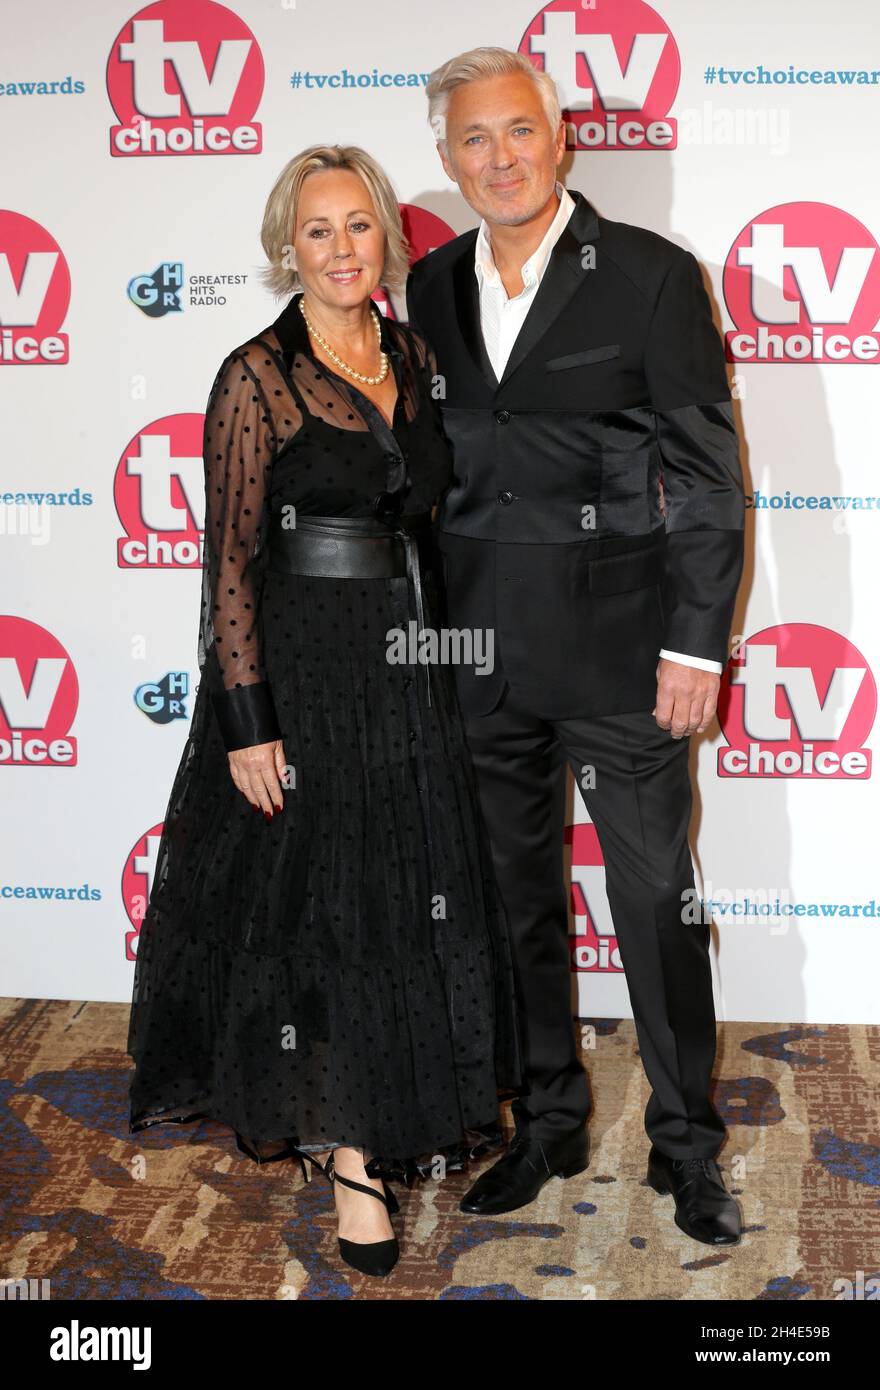 Shirlie Holliman (left) and Martin Kemp attending the TV Choice Awards held at the Hilton Hotel, Park Lane, London Stock Photo